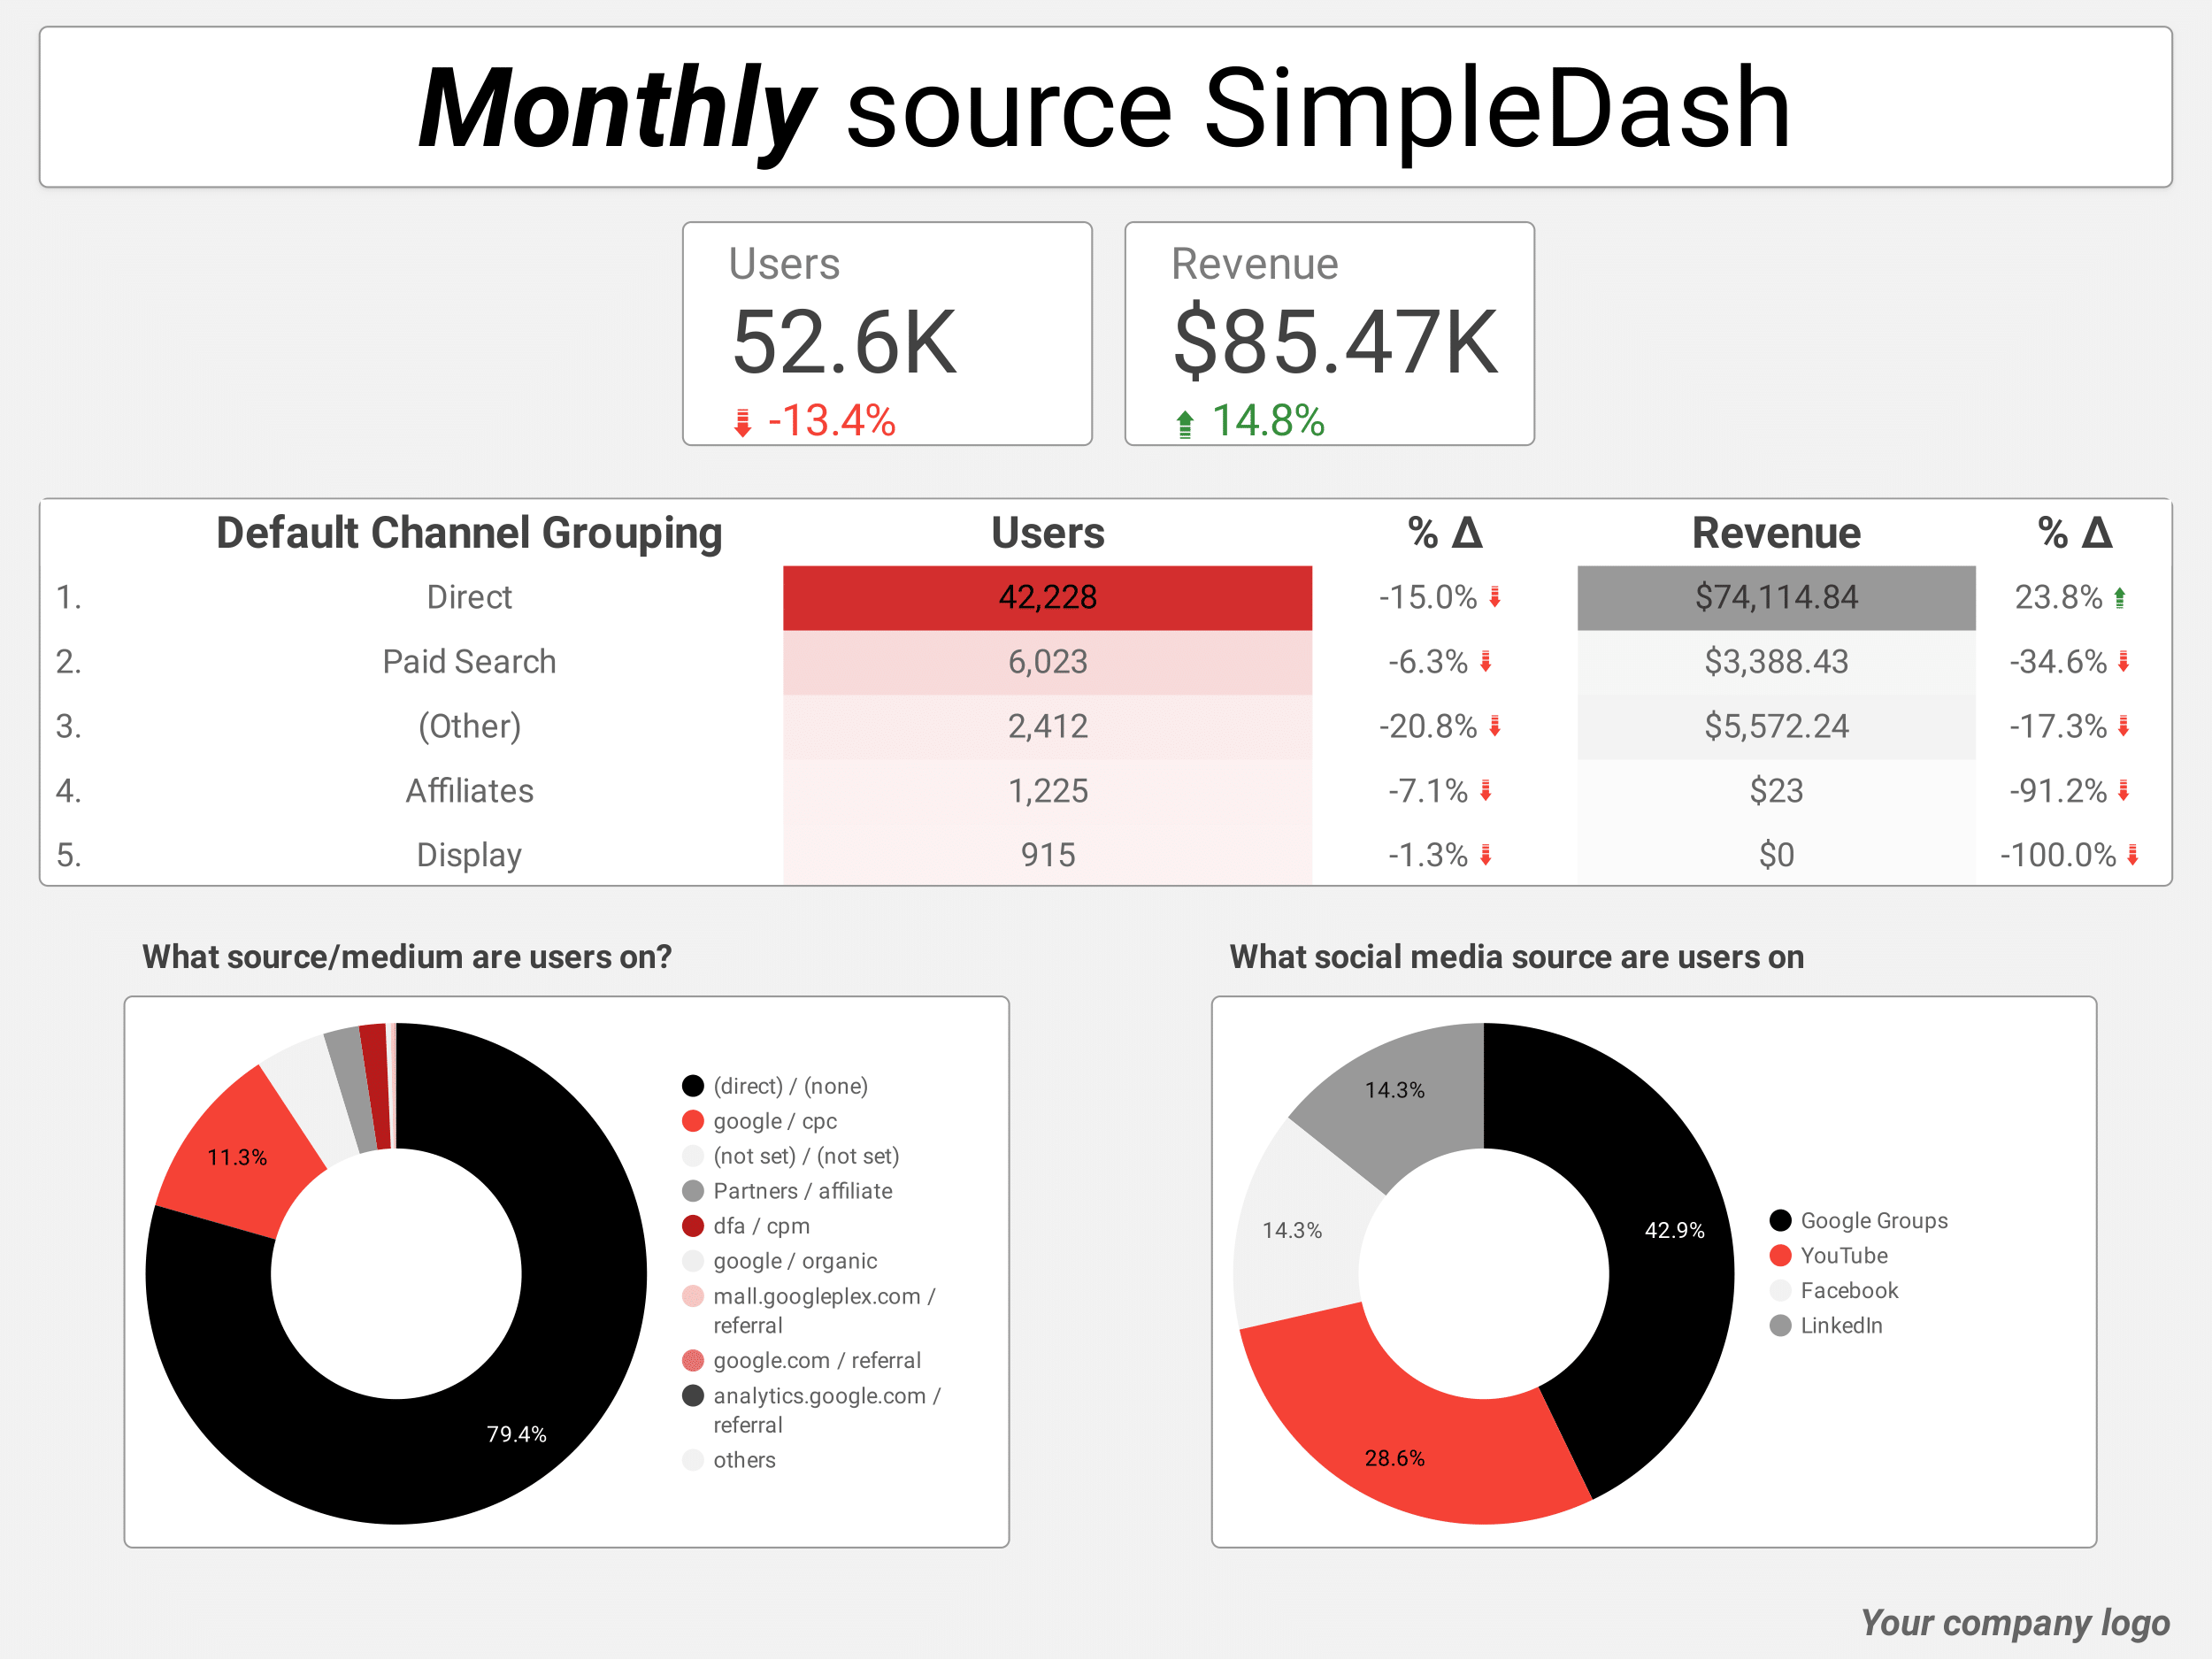 DST_E-commerce_SimpleDash_monthly_source-1.png